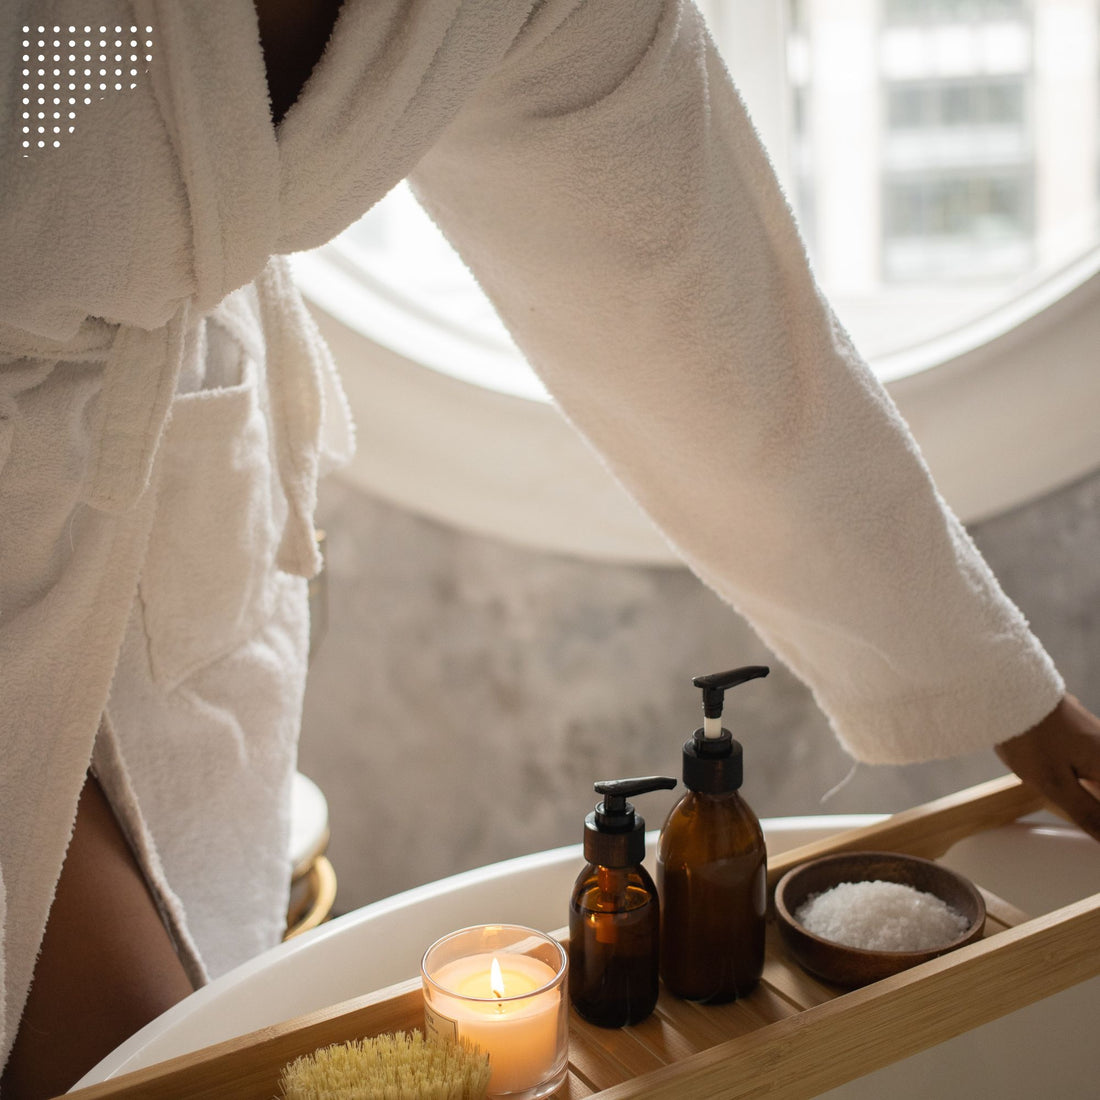 Elevate Your Daily Routine: Creating a Spa-Like Bathroom Experience